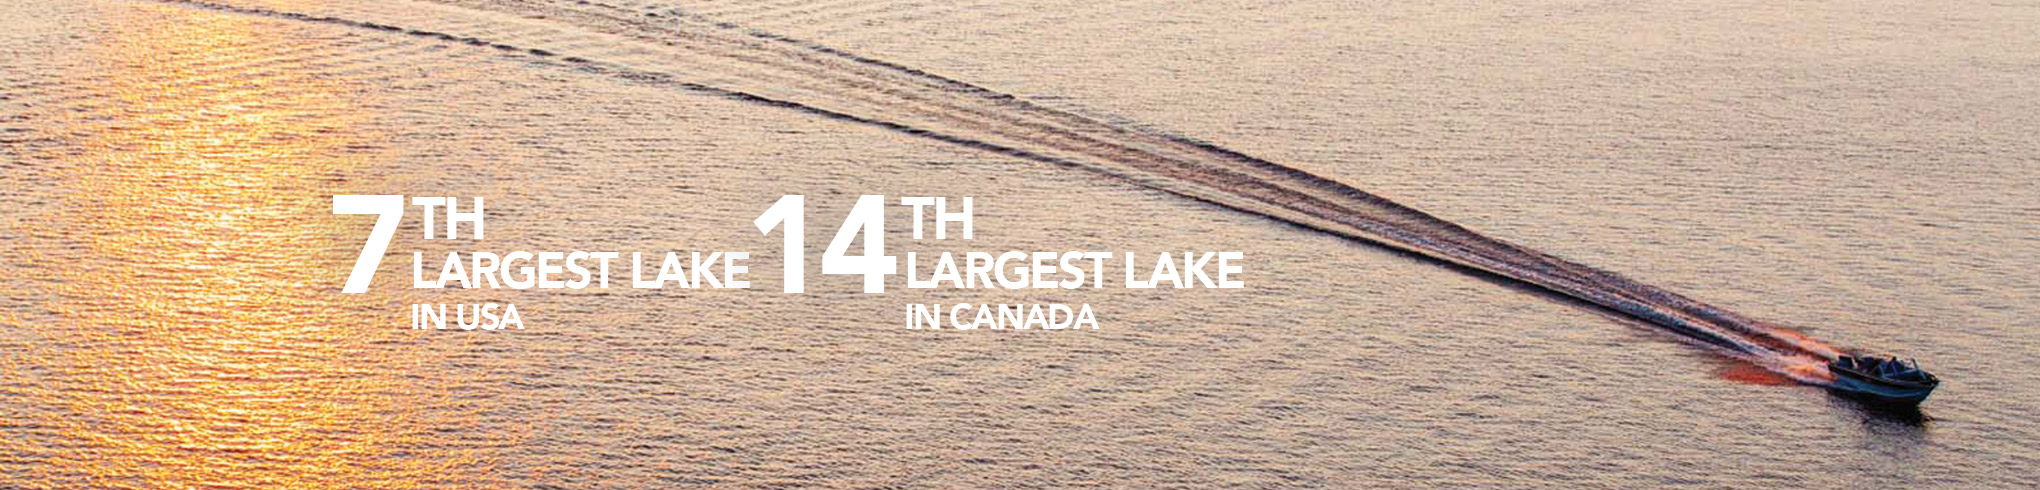 7th Largest Lake in the USA; 14th Largest Lake in Canada